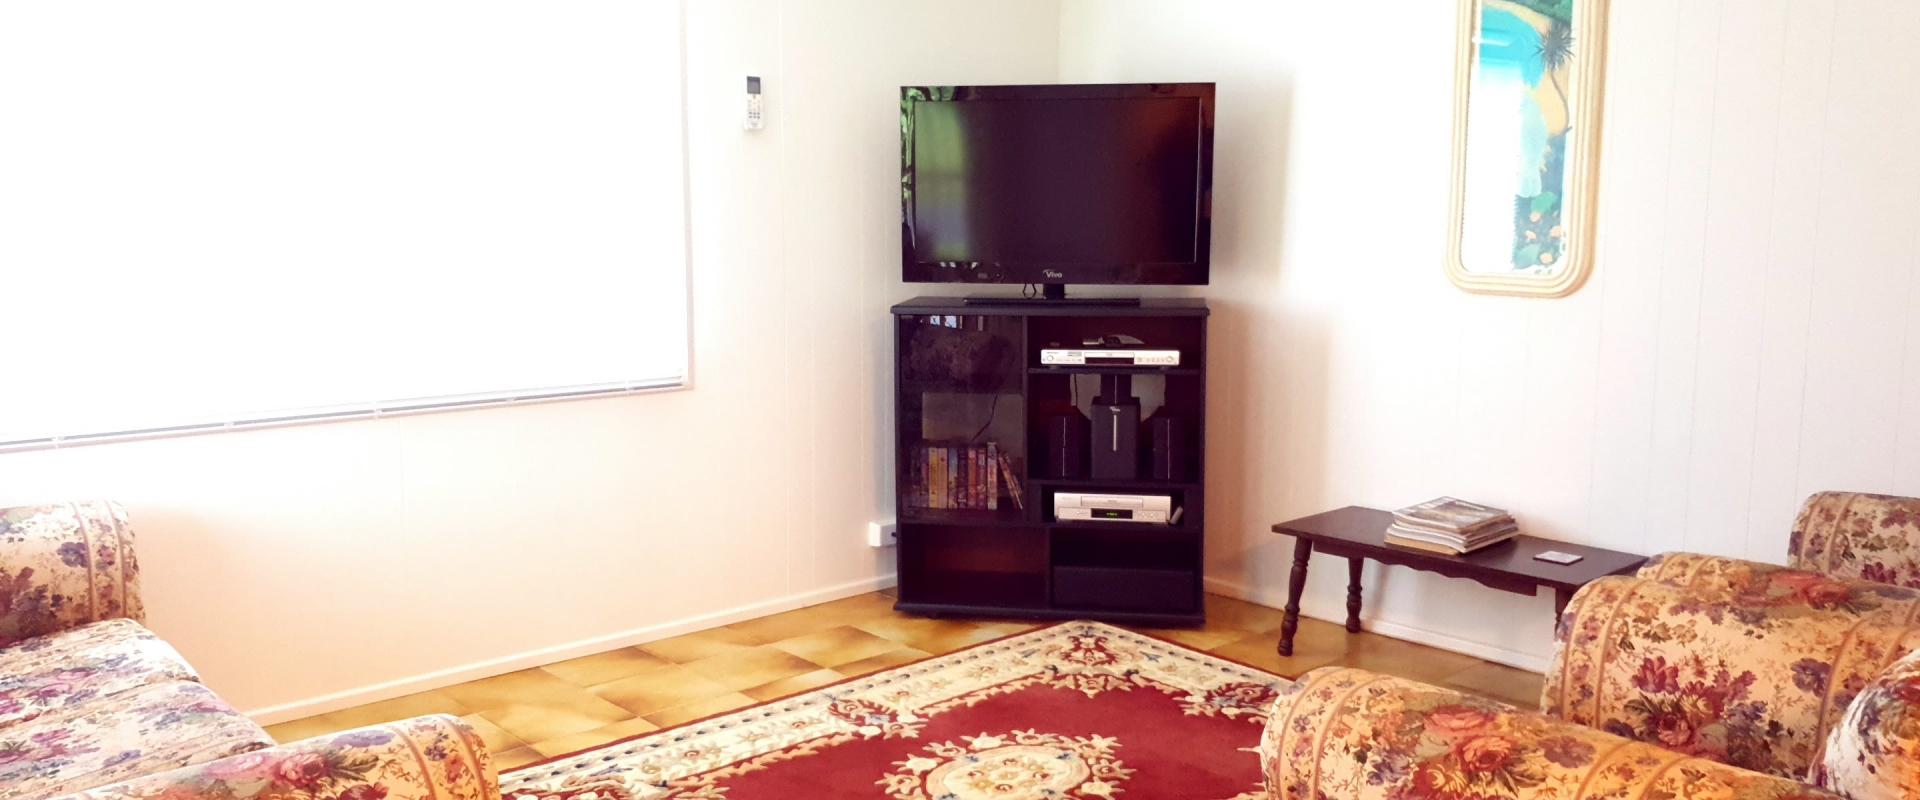 TV Lounge room with large Split A/C